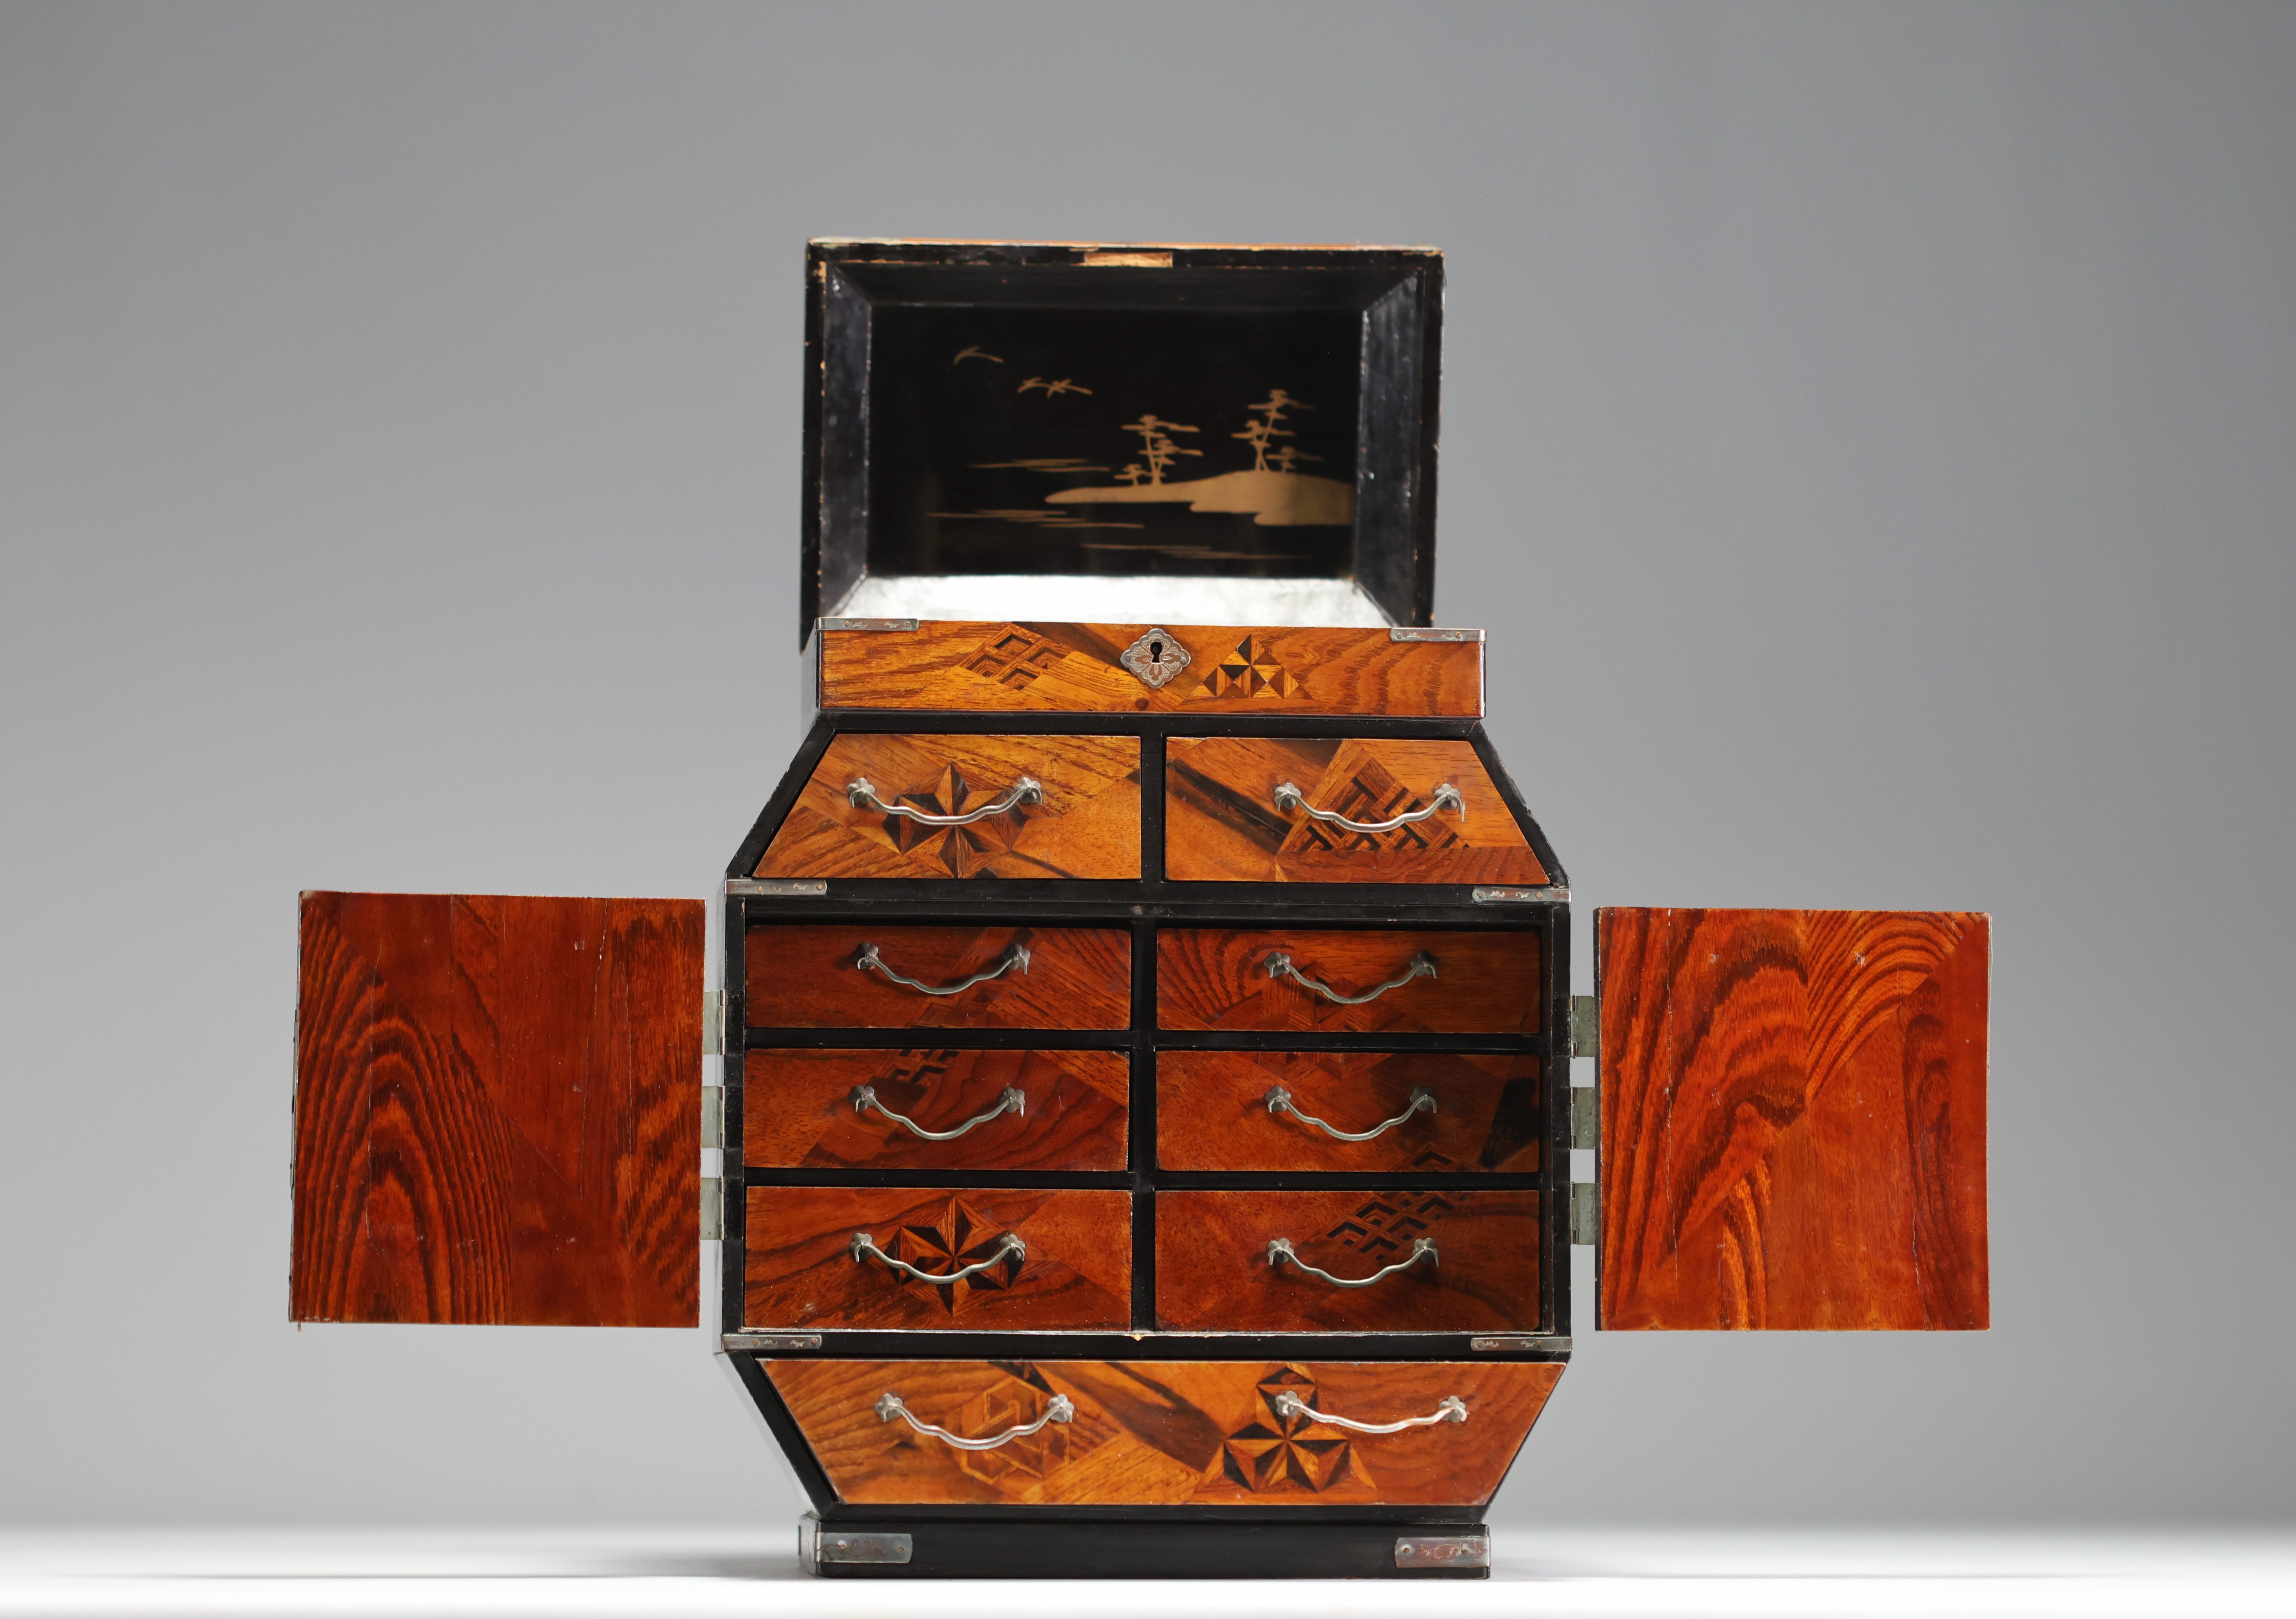 Japan - Small jewellery box, wood and lacquer marquetry, circa 1900. - Image 3 of 4